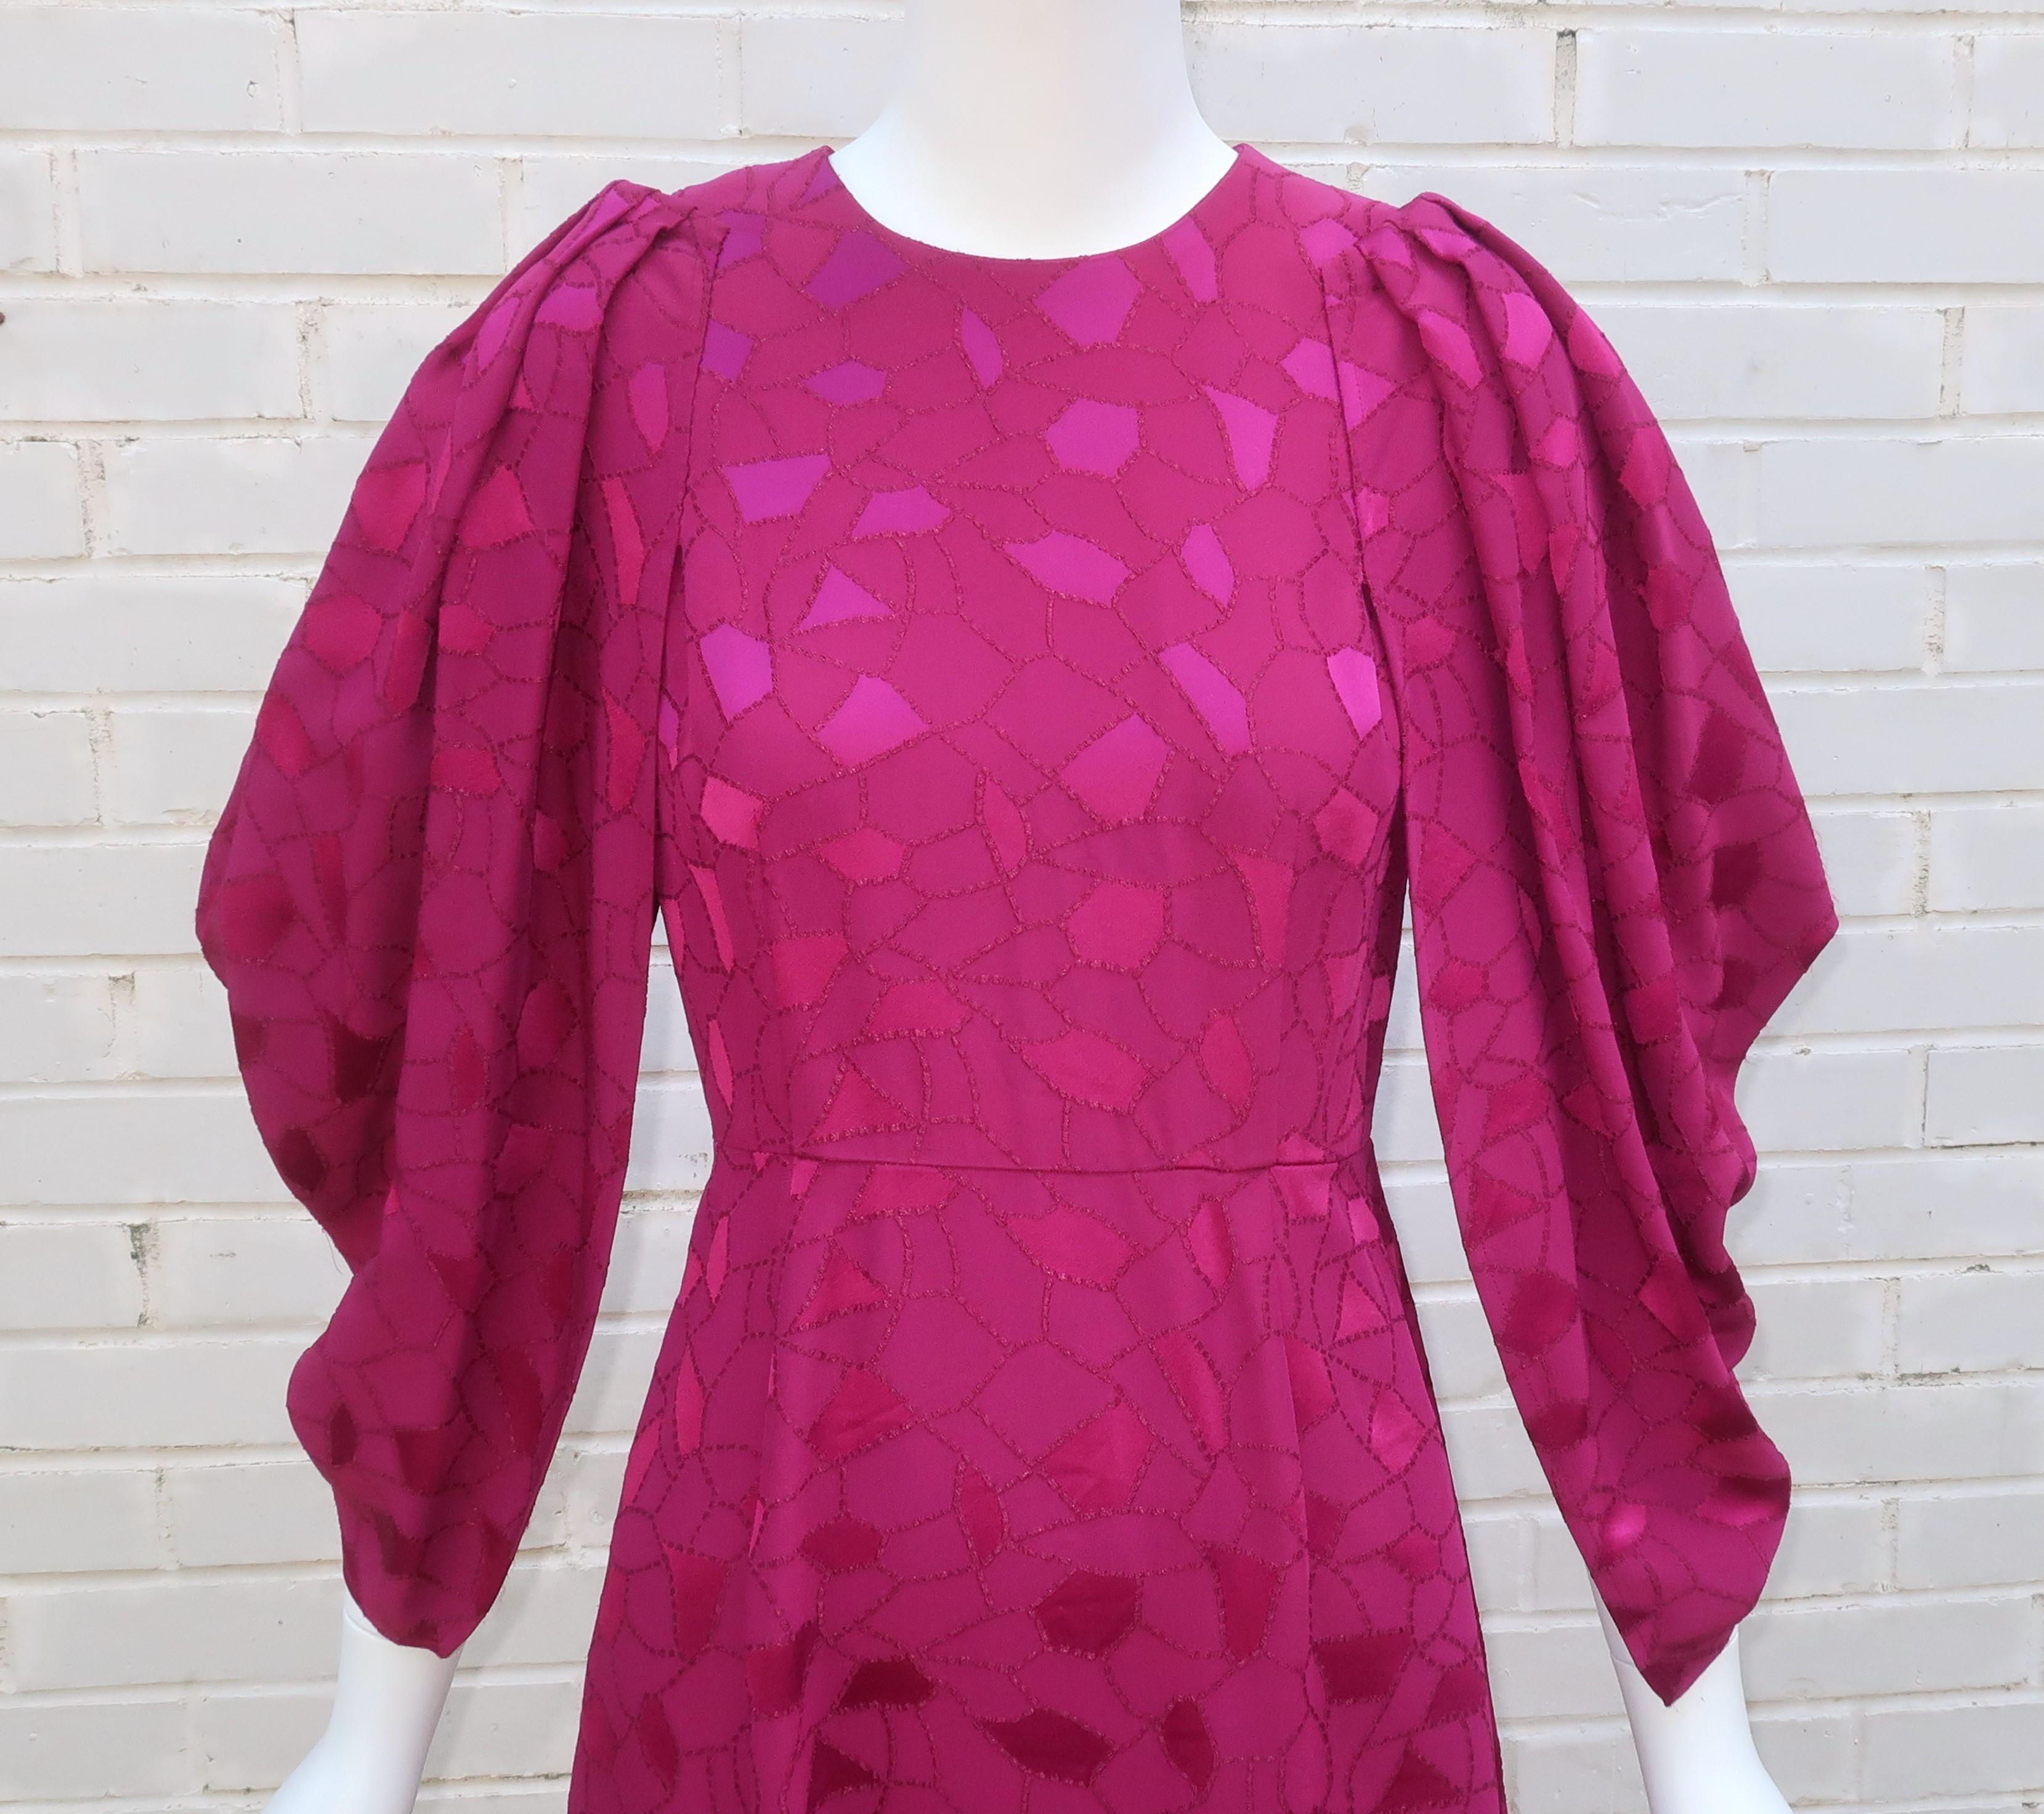 Red CO Cocoon Sleeve Magenta Dress, 2018 For Sale